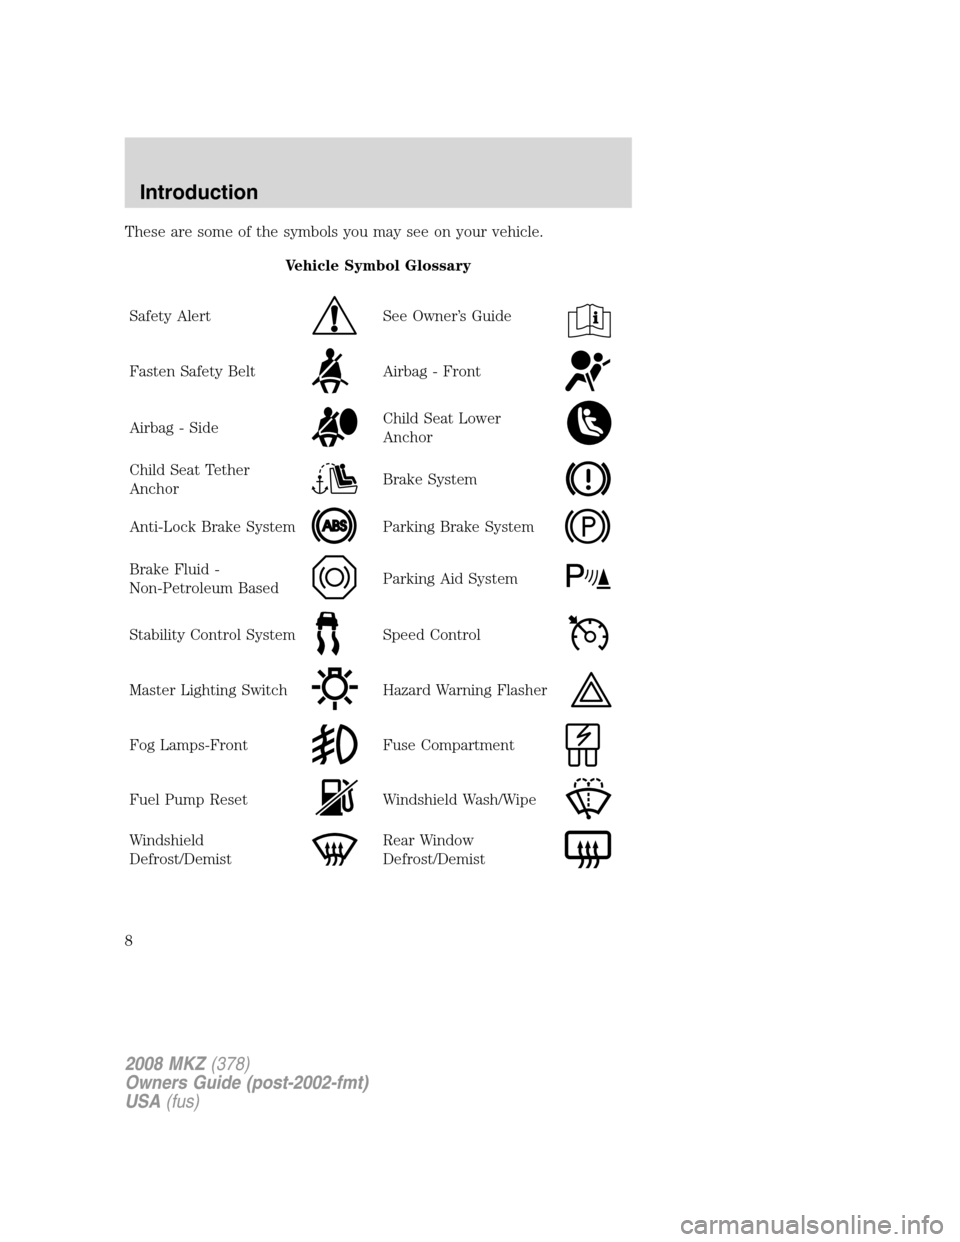 LINCOLN MKZ 2008  Owners Manual These are some of the symbols you may see on your vehicle.
Vehicle Symbol Glossary
Safety Alert
See Owner’s Guide
Fasten Safety BeltAirbag - Front
Airbag - SideChild Seat Lower
Anchor
Child Seat Tet